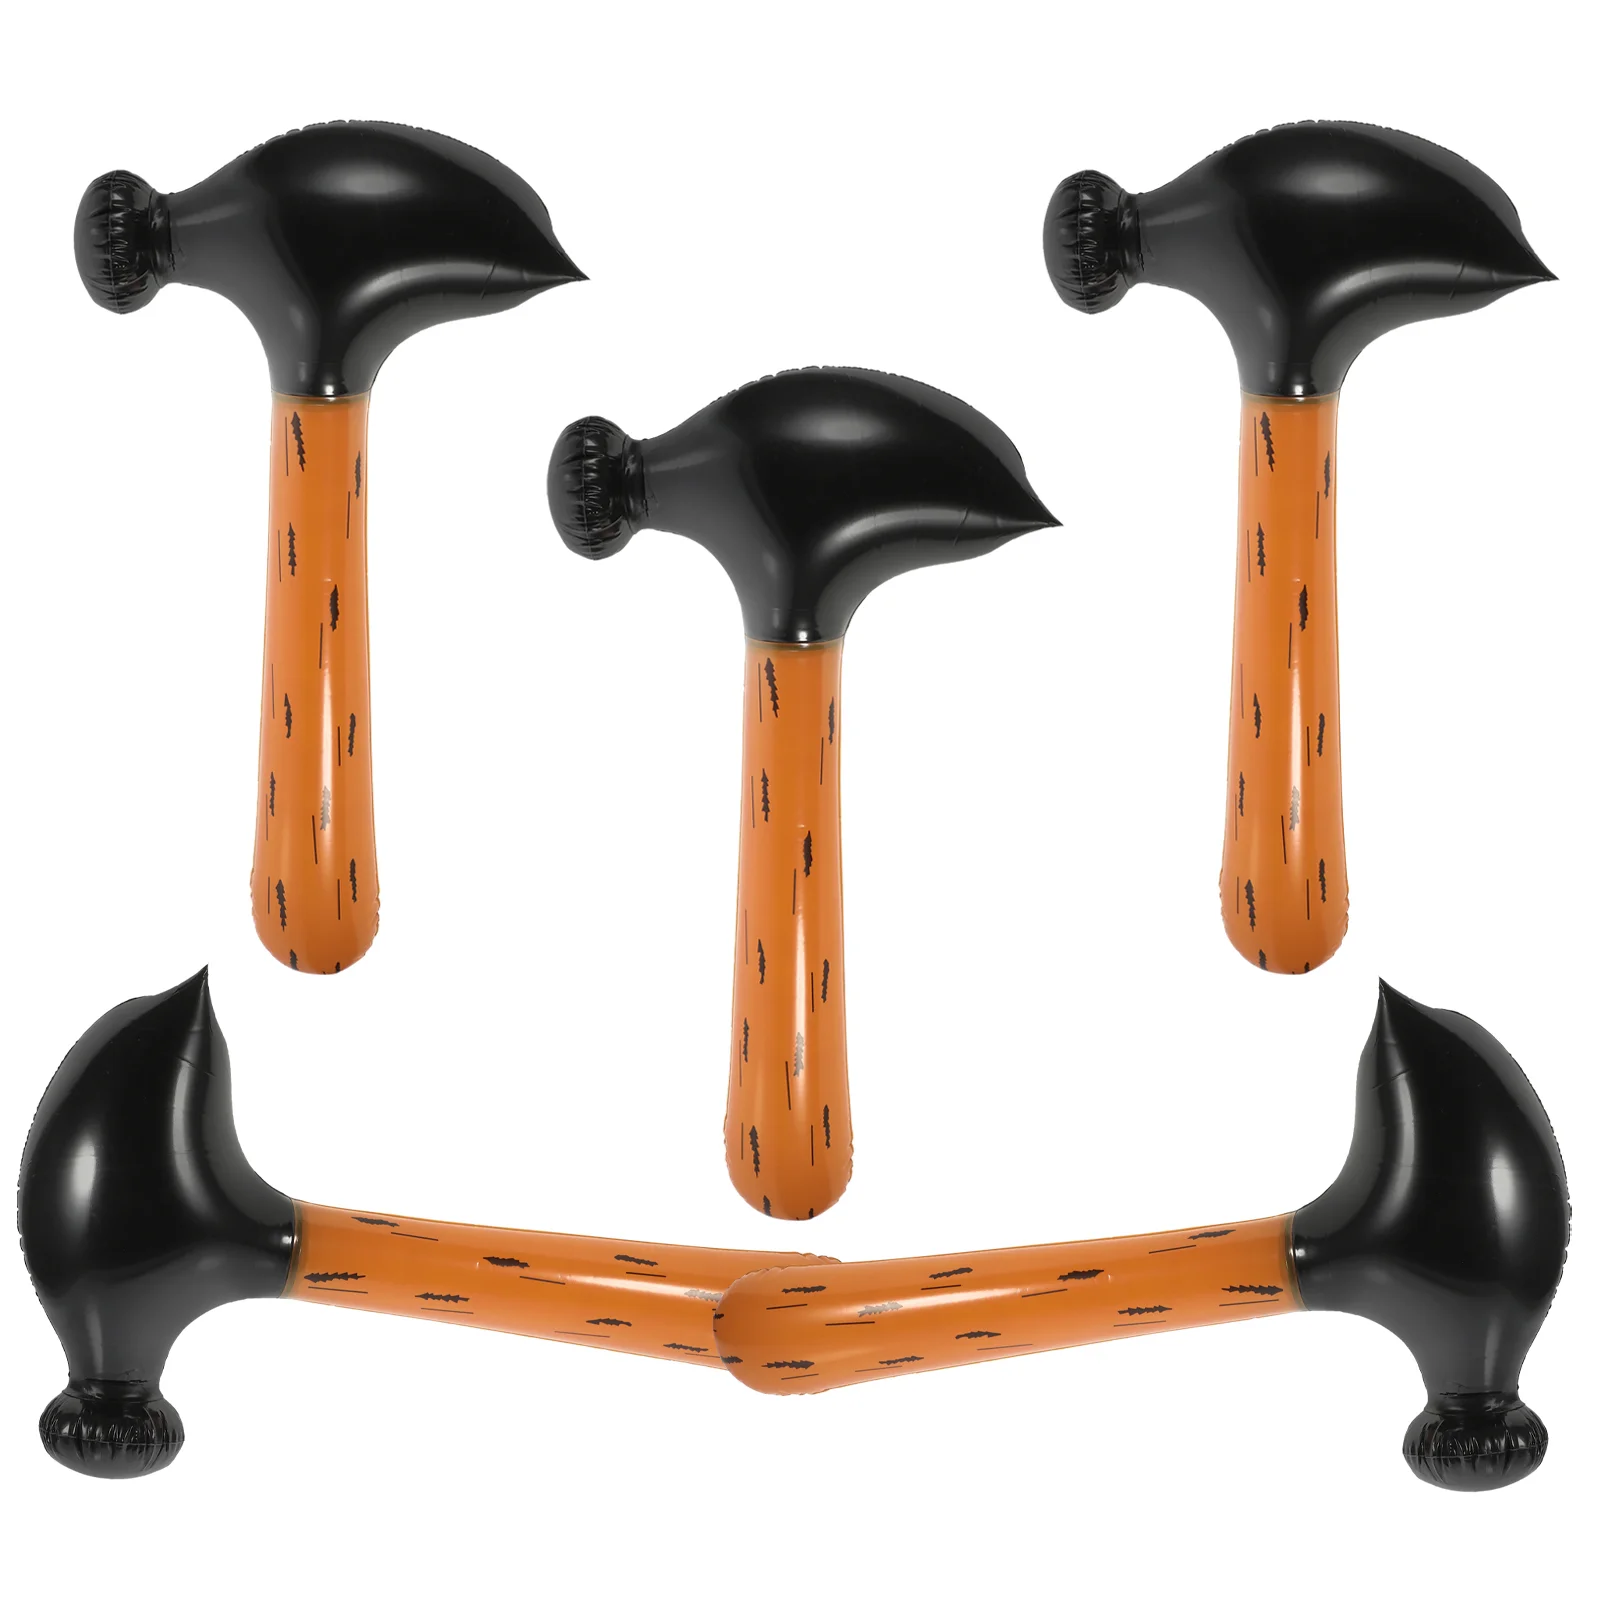 

5 Pcs Outdoor Playset PVC Hammer Toy Wood Grain Kid Gift Inflatable Air Hammers Presents